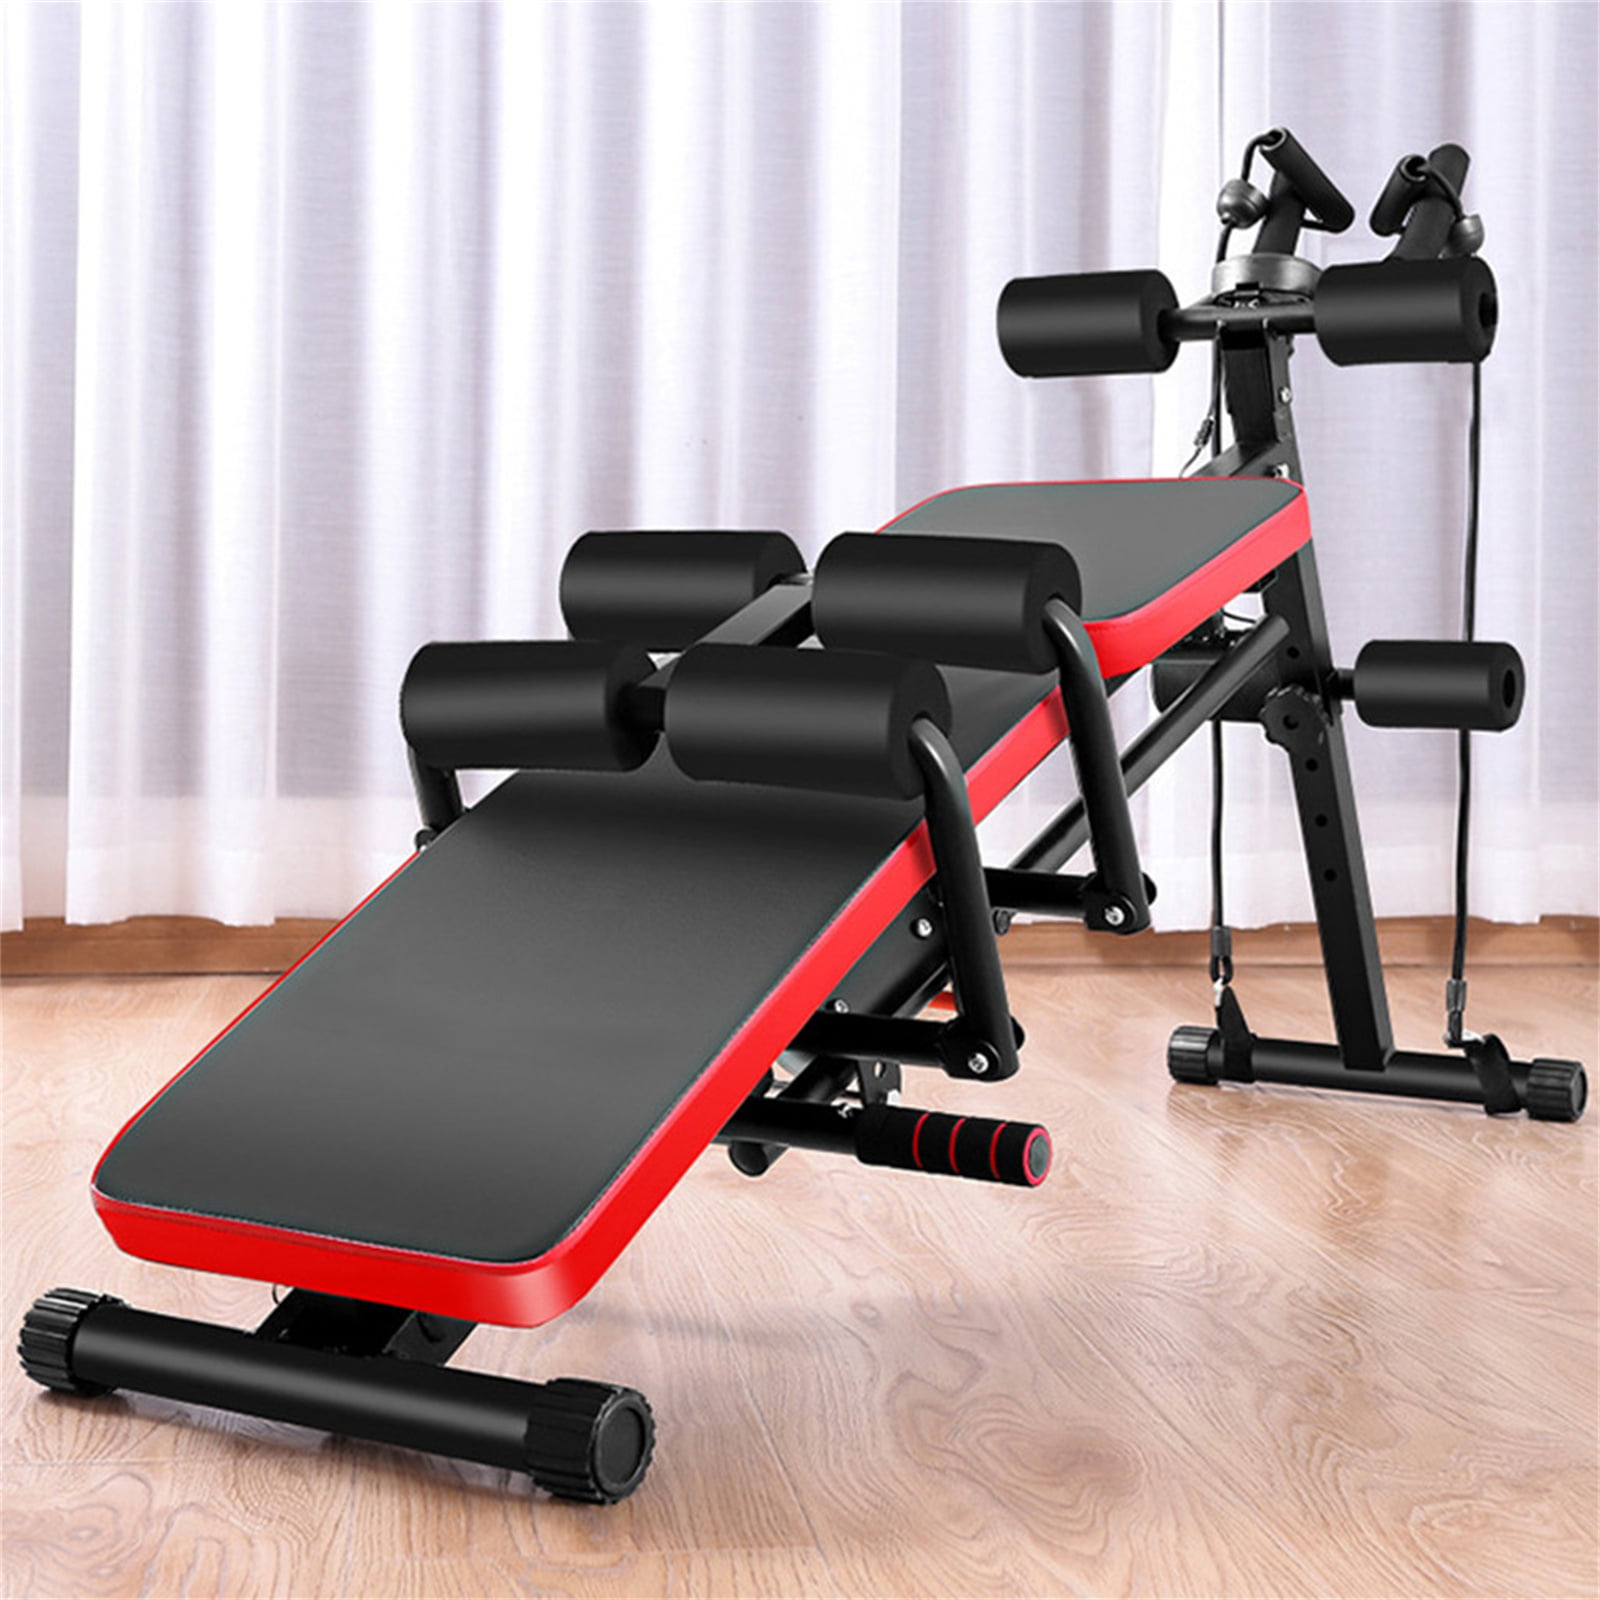 Home Gym Exercise Sport Foldable Decline Sit Up Bench Crunch Board Fitness 